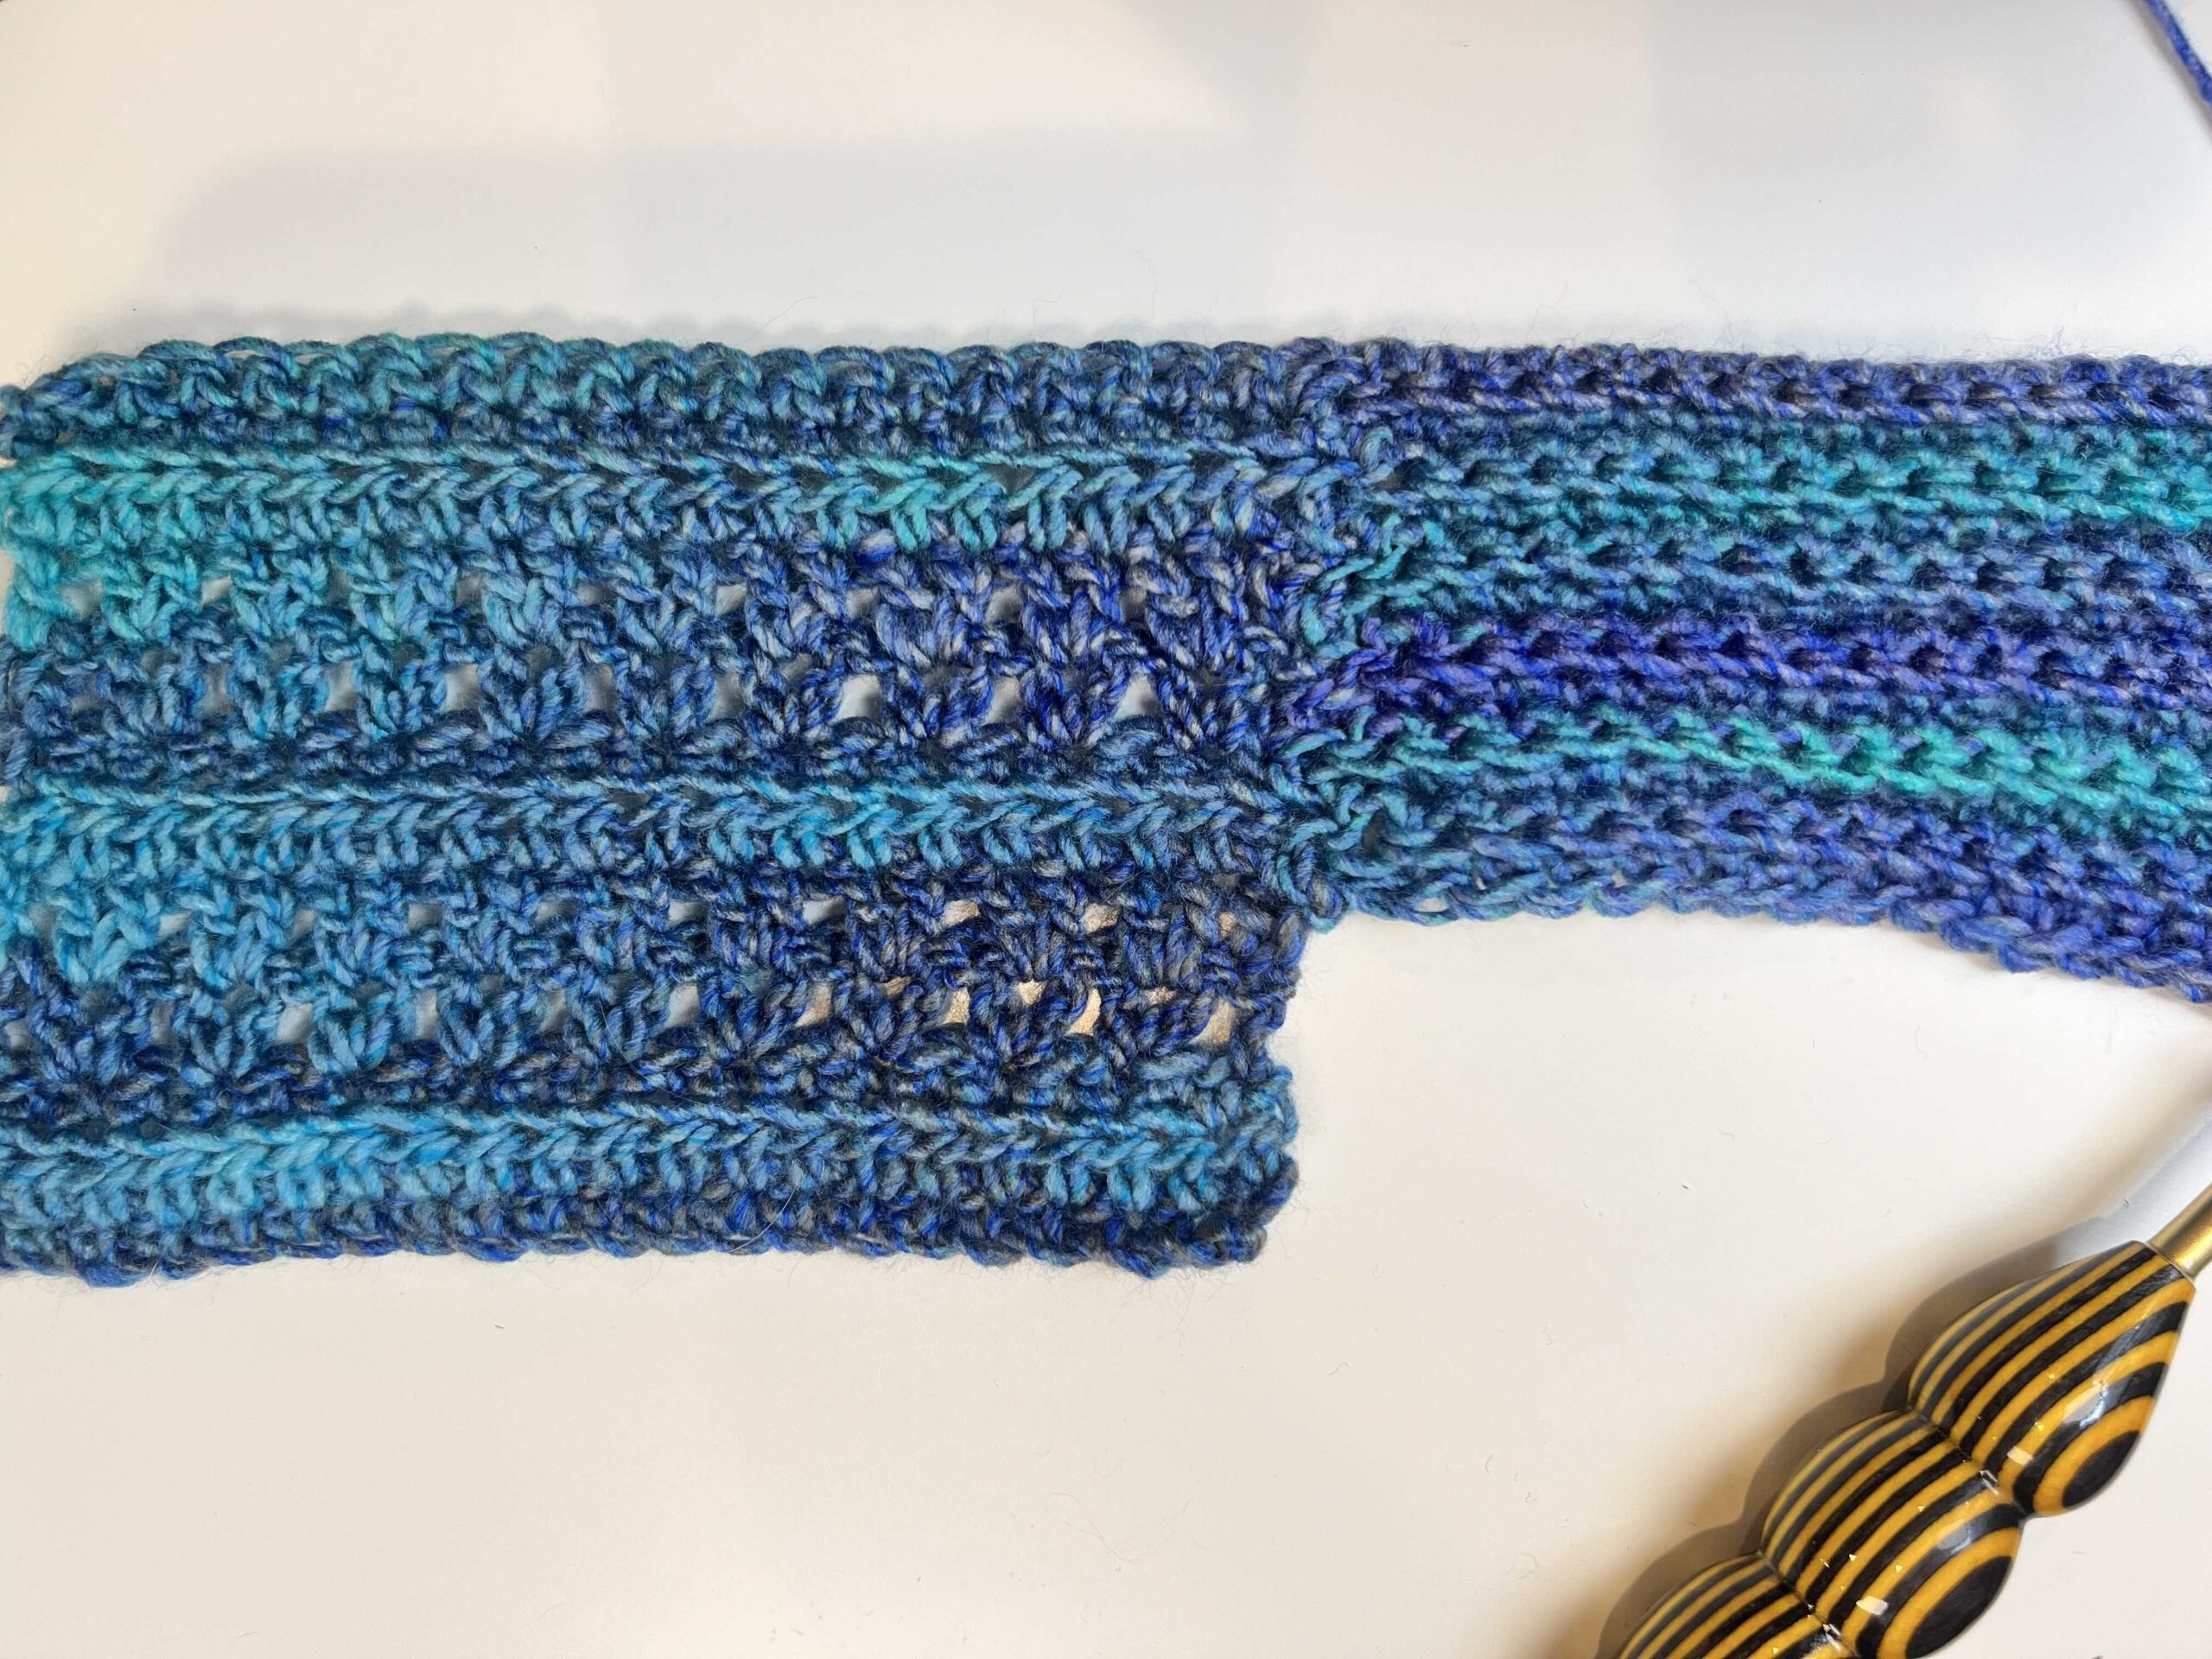 gauge swatch in progress for the You Are Valued Crochet Cocoon Cardigan by Marly Bird